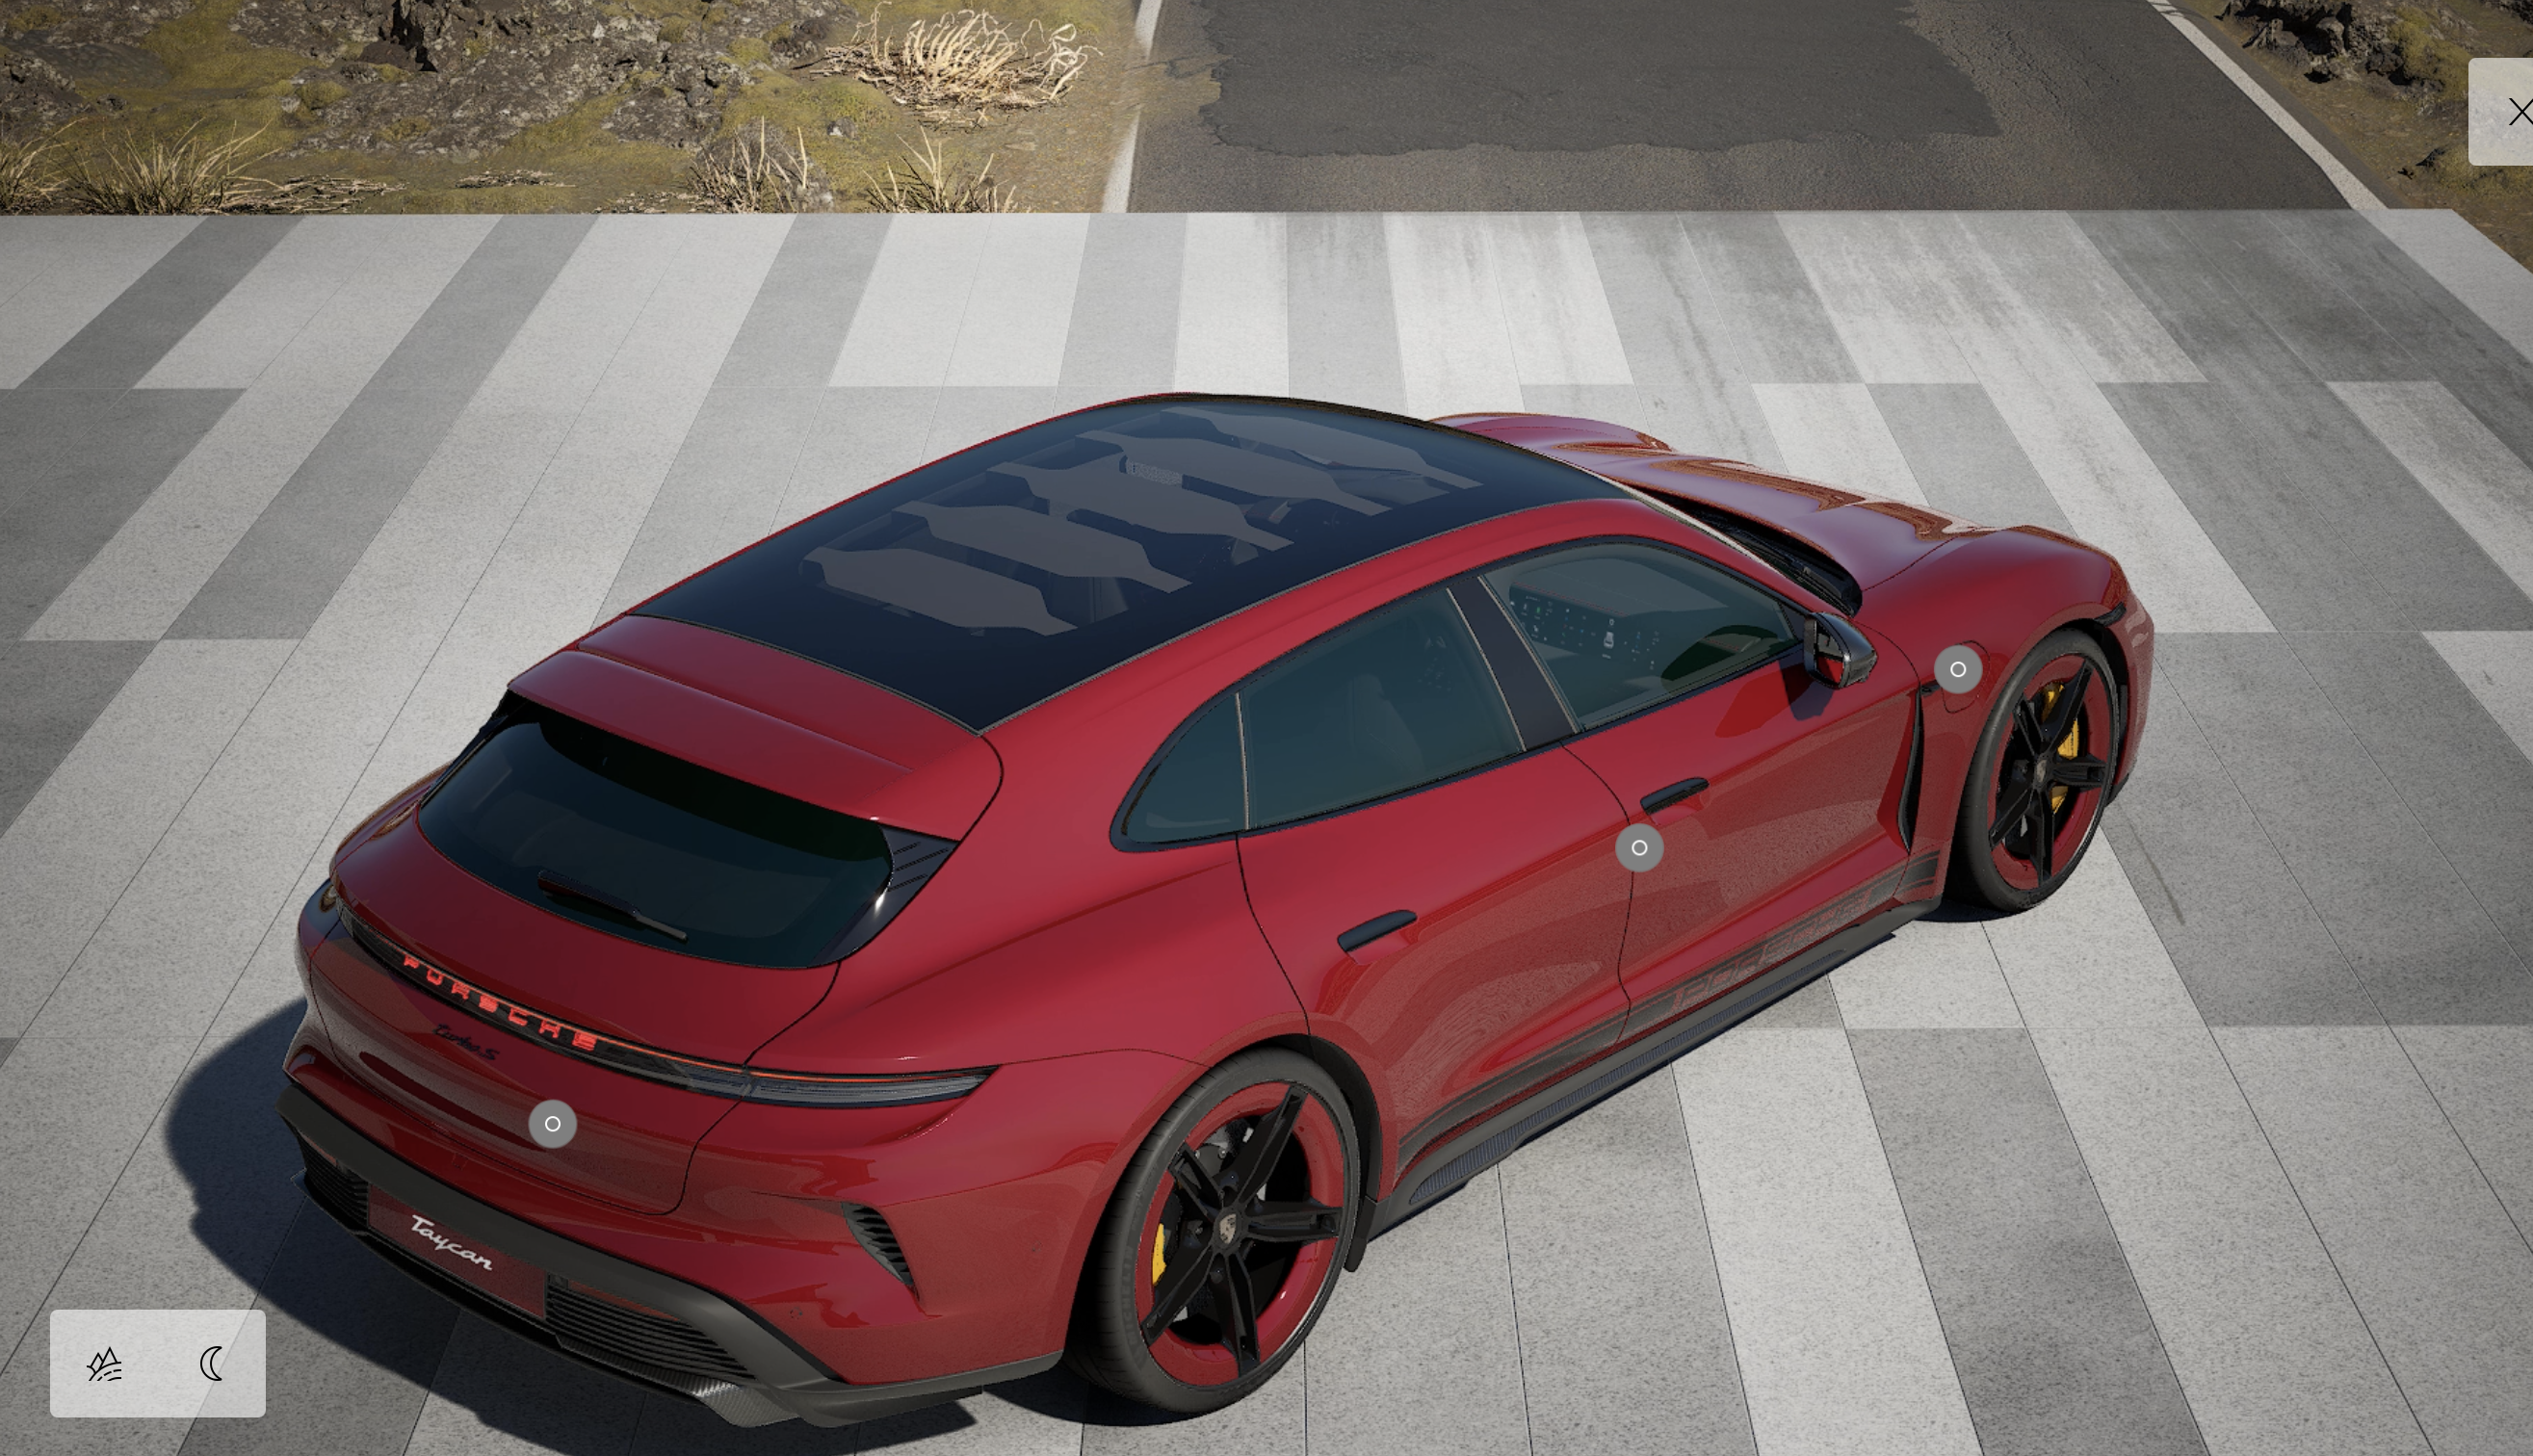 Porsche Taycan Let's Share Our Configurations for the MY2025 Model Screenshot 2024-02-22 at 22.02.23